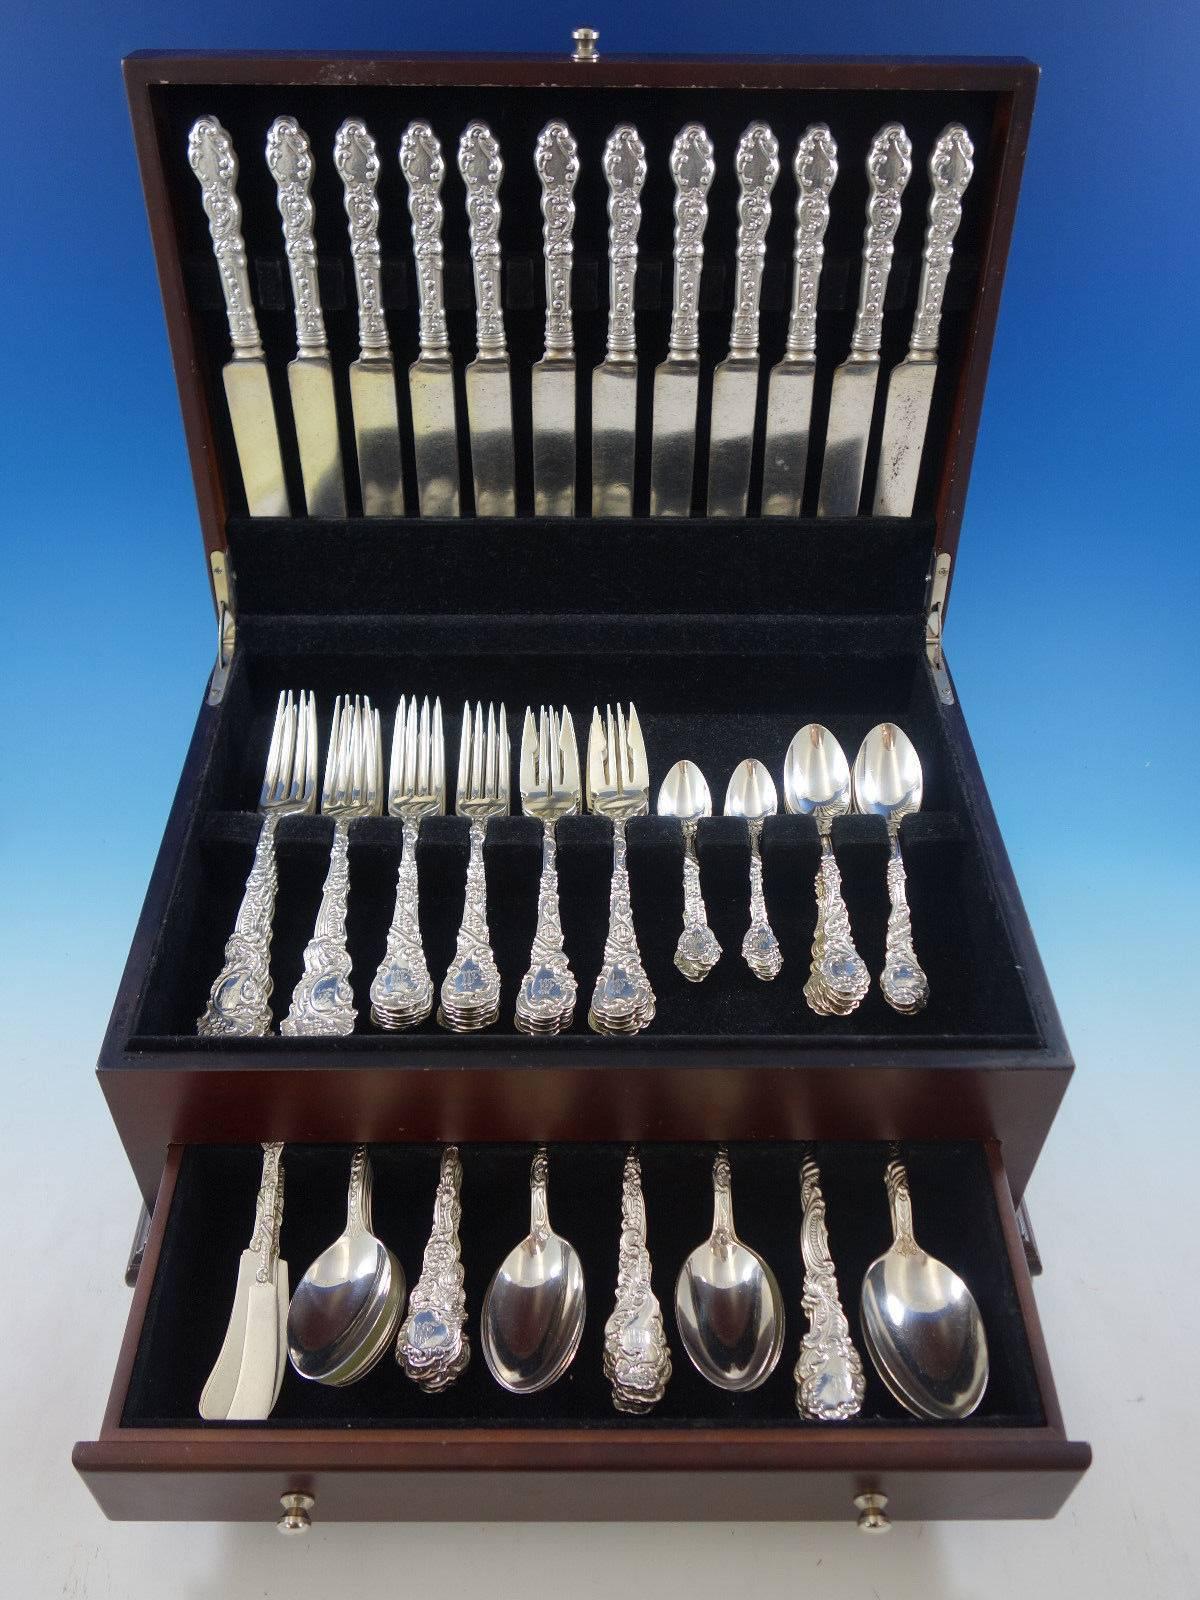 Marie Antoinette by Gorham sterling silver dinner size flatware set of 114 pieces. This set includes: 12 dinner size knives with blunt silver plated blades, 9 1/2